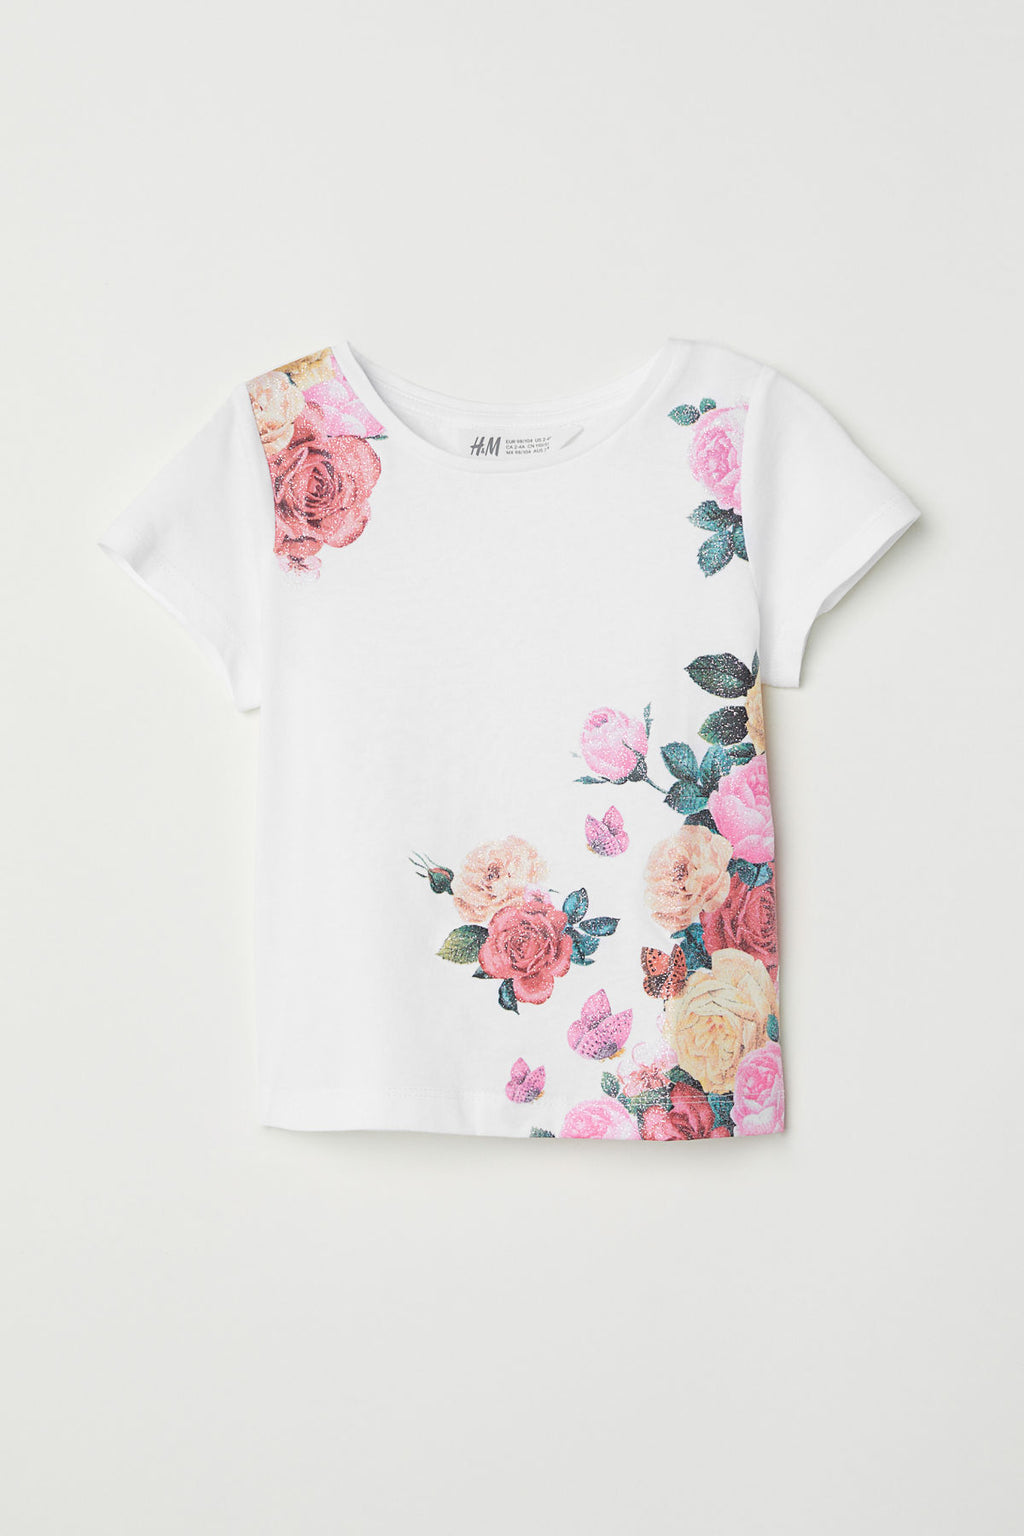 Remera H&M Jersey Top with Printed Design